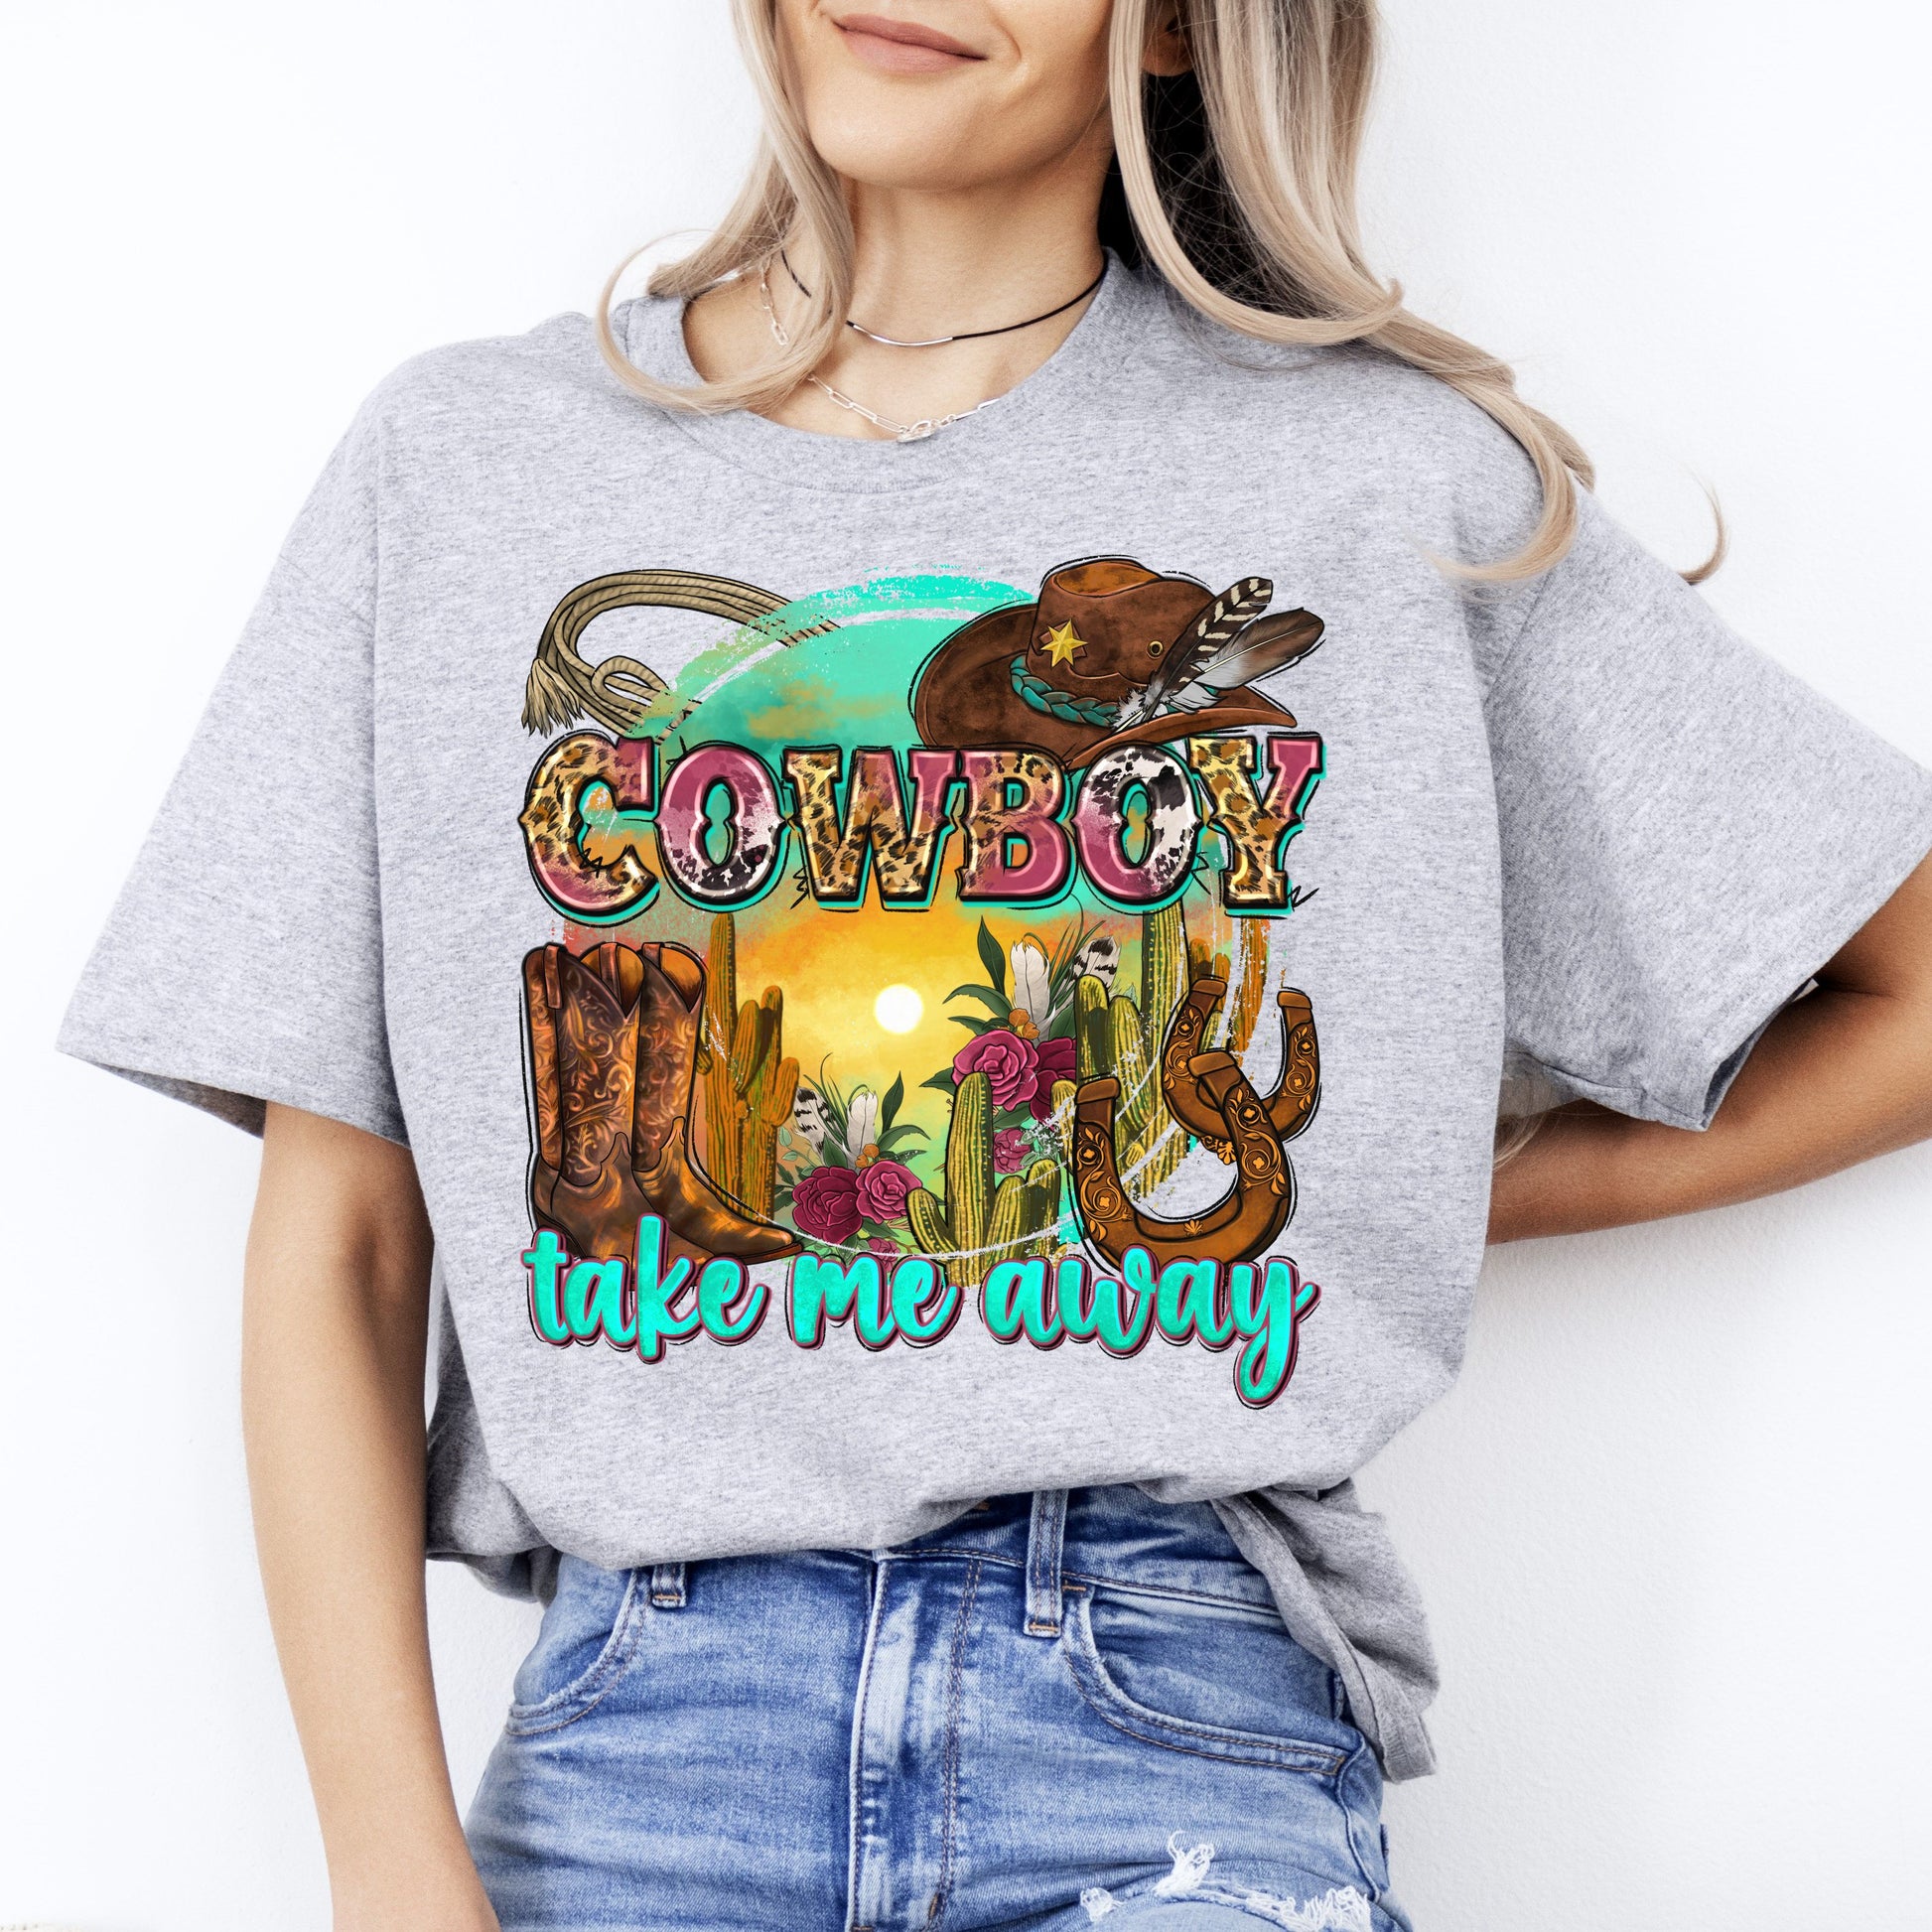 Cowboy take me away T-Shirt Texas Western boots cactus hat Unisex tee White Sand Sport Grey-Sport Grey-Family-Gift-Planet